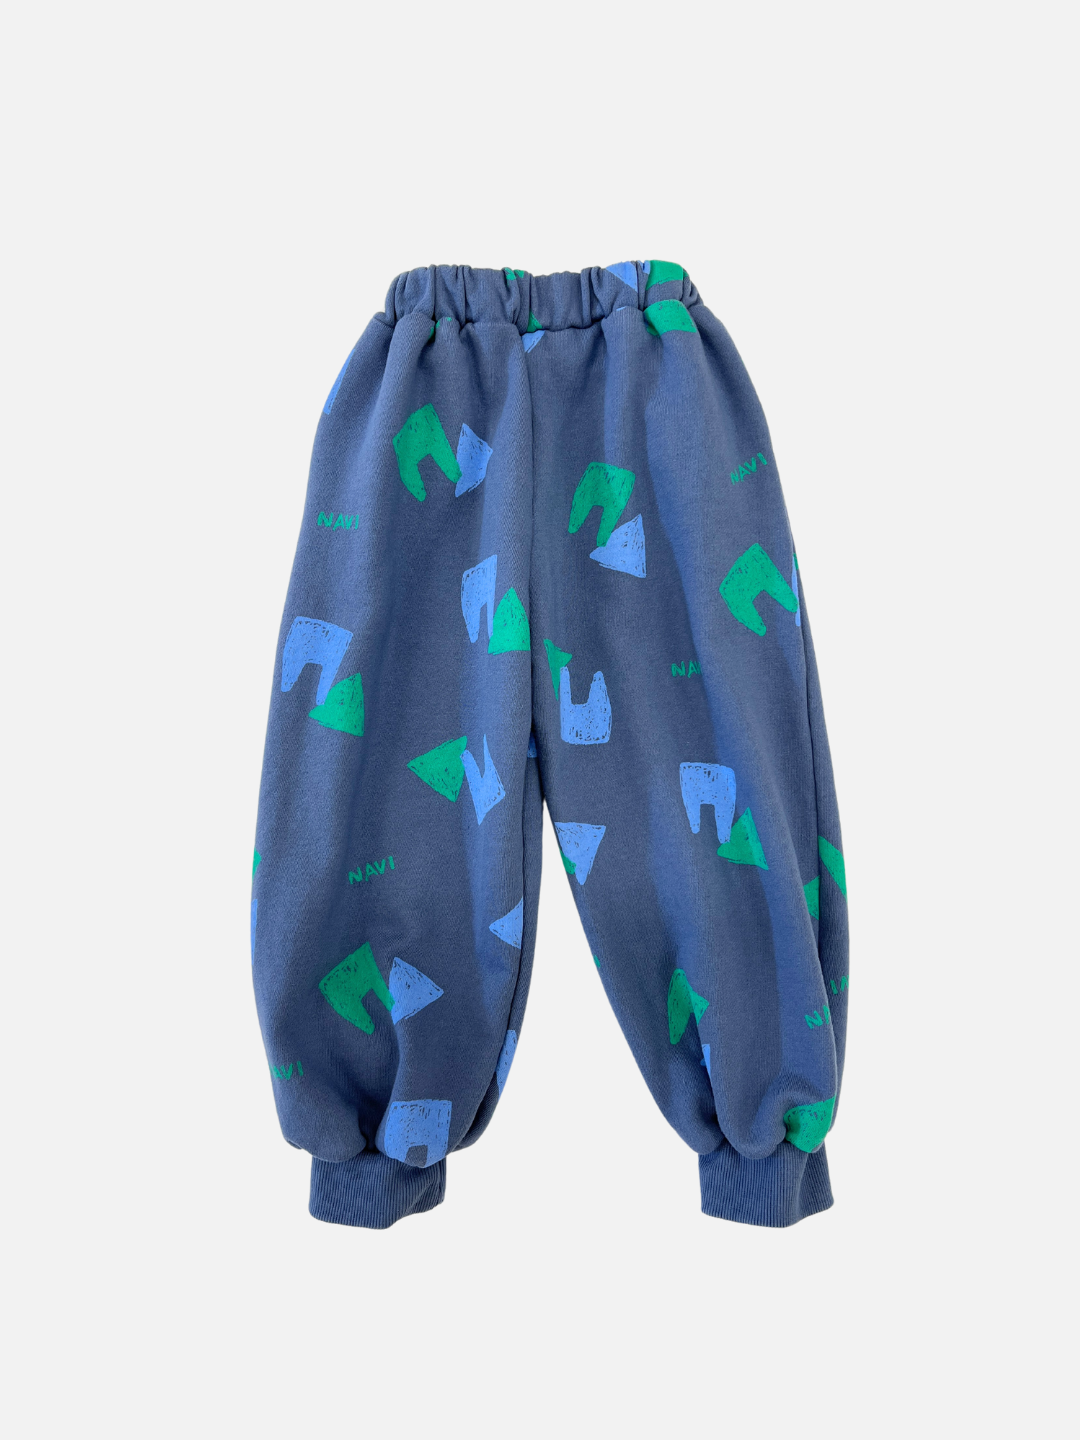 Back view of kids blue sweatpants with an all over pattern of green and blue shapes and the brand name Navi.